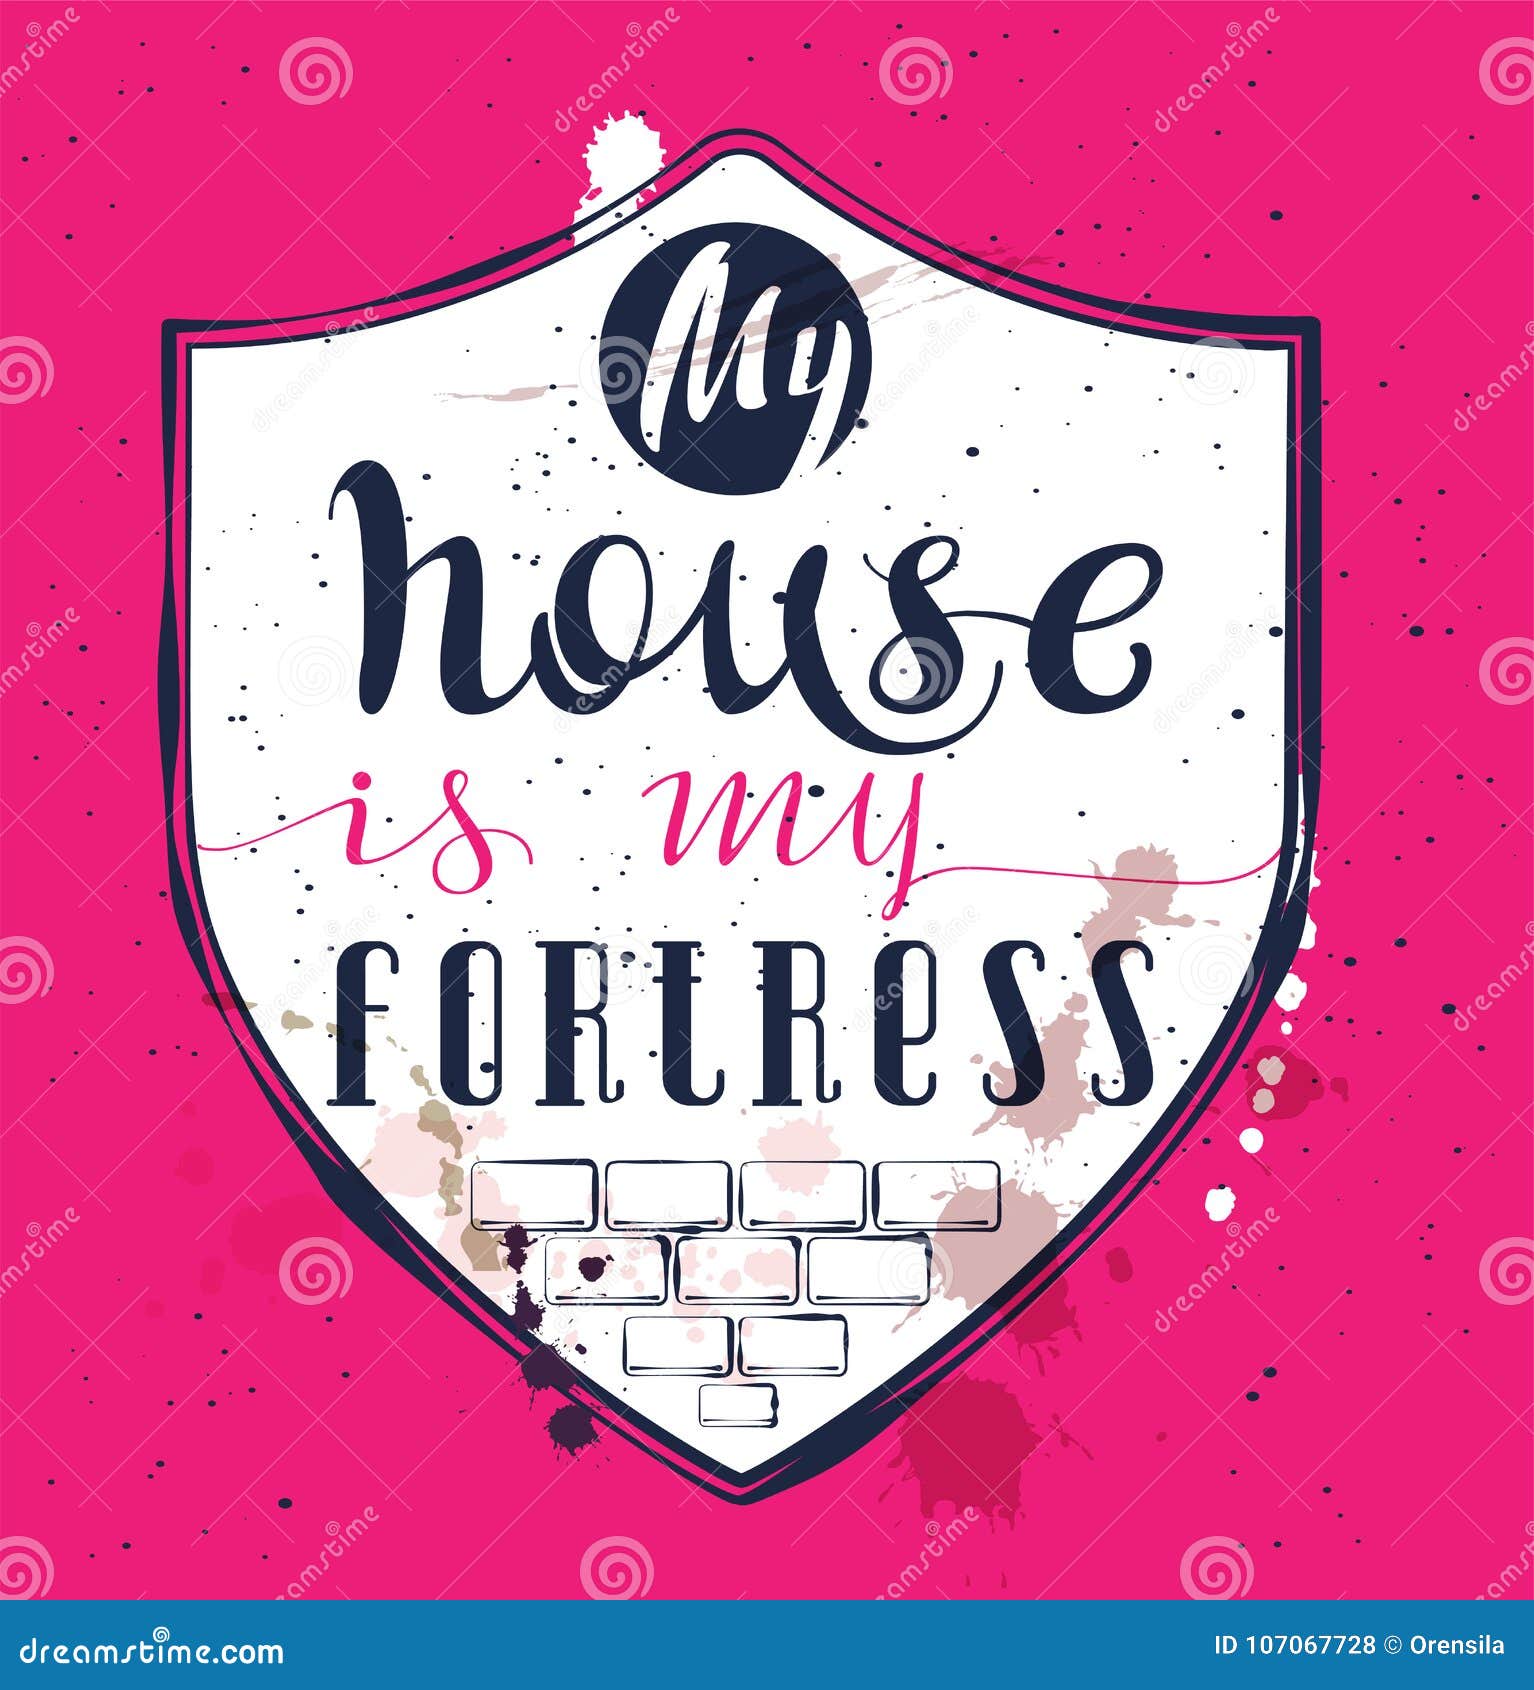 my home is my fortress. proverb text on shield wall